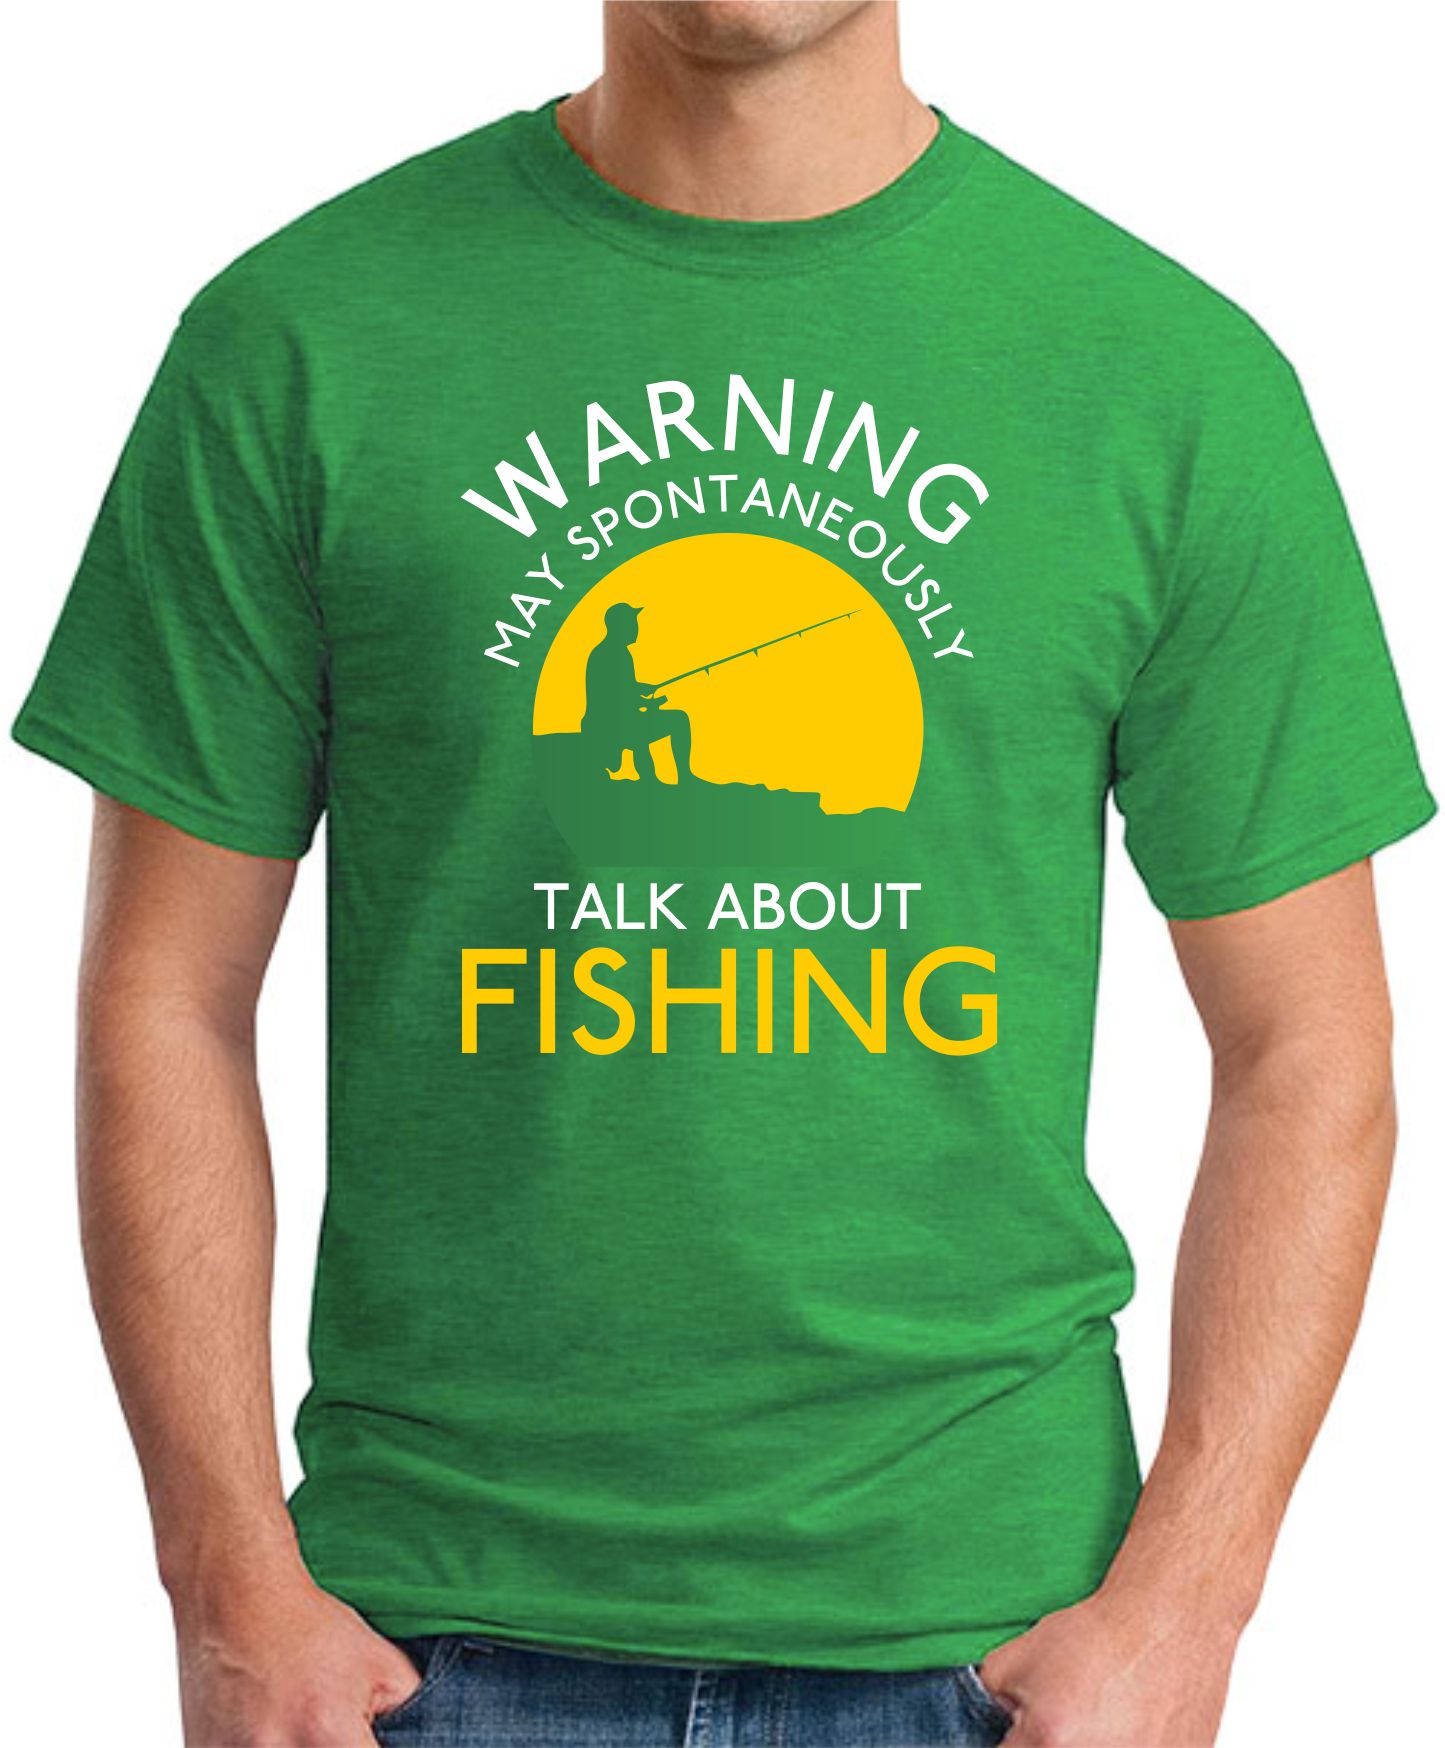 https://www.geekytees.co.uk/wp-content/uploads/2020/11/WARNING-MAY-SPONTANEOUSLY-TALK-ABOUT-FISHING-g.jpg